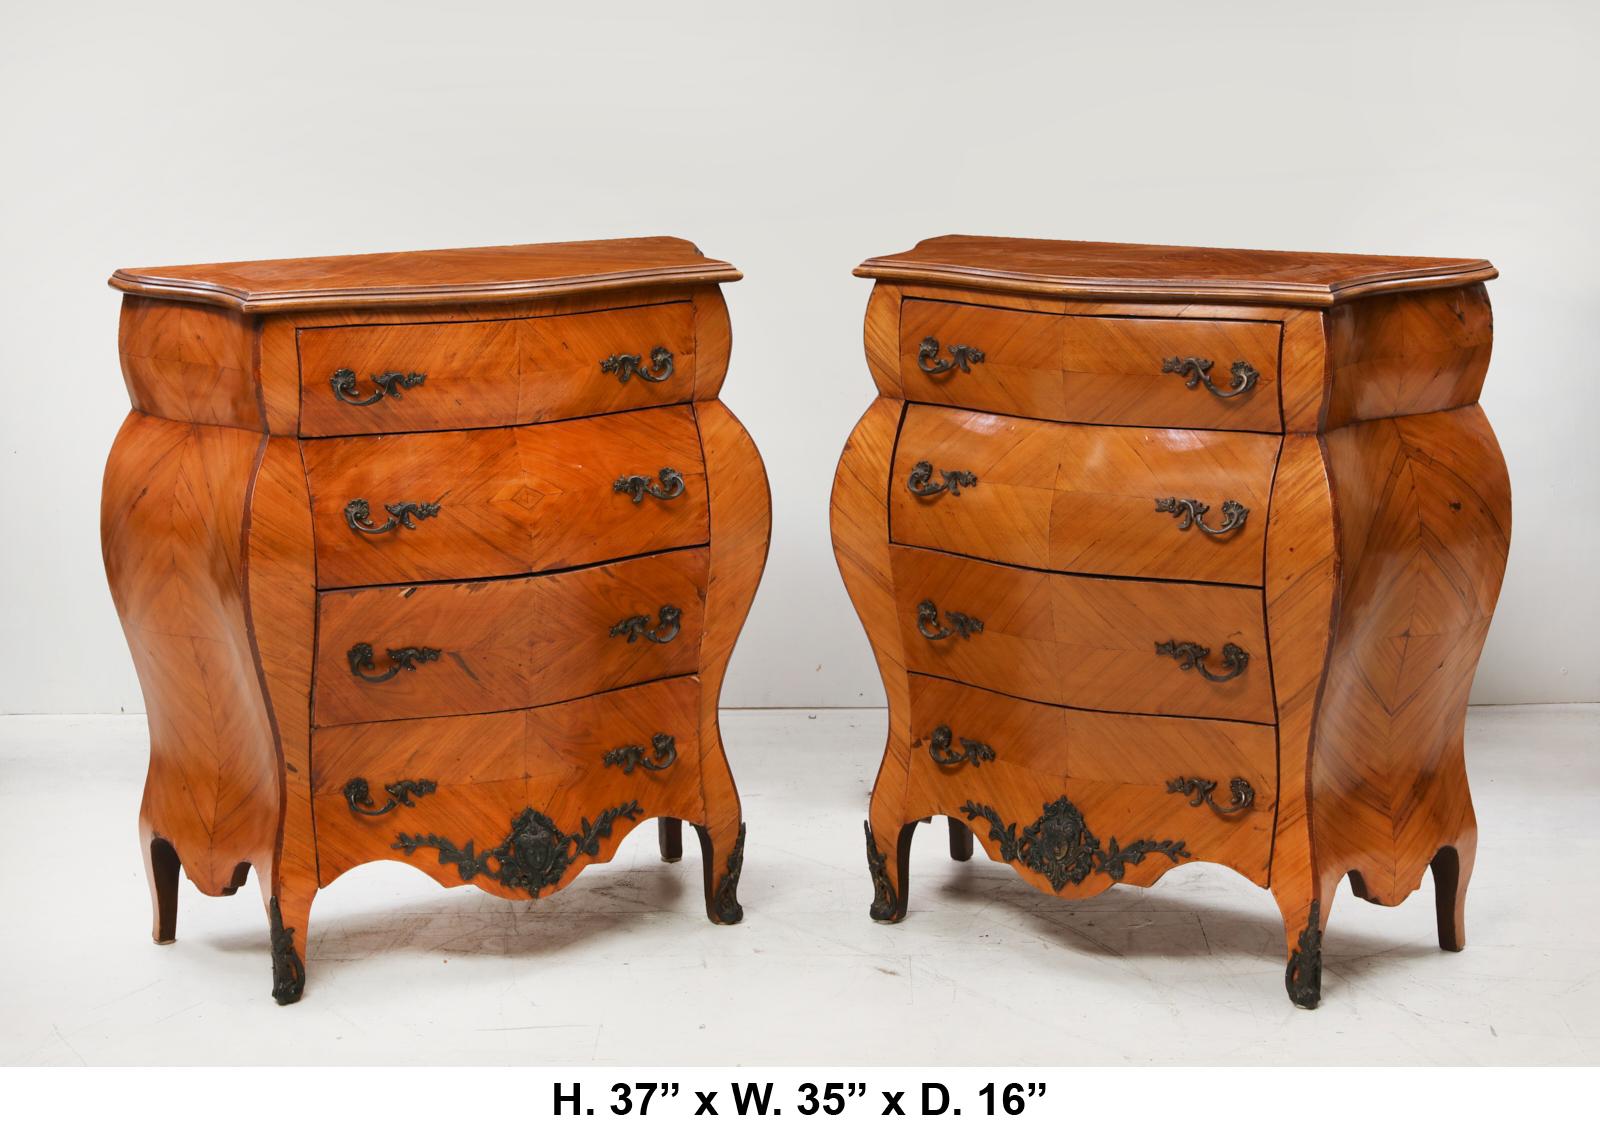 Impressive Pair of bronze mounted Italian Rococo style walnut side chests (small commodes) with four drawers, 20th century
Beautiful proportion and very practical, structurally sound. 
Measures: H. 38